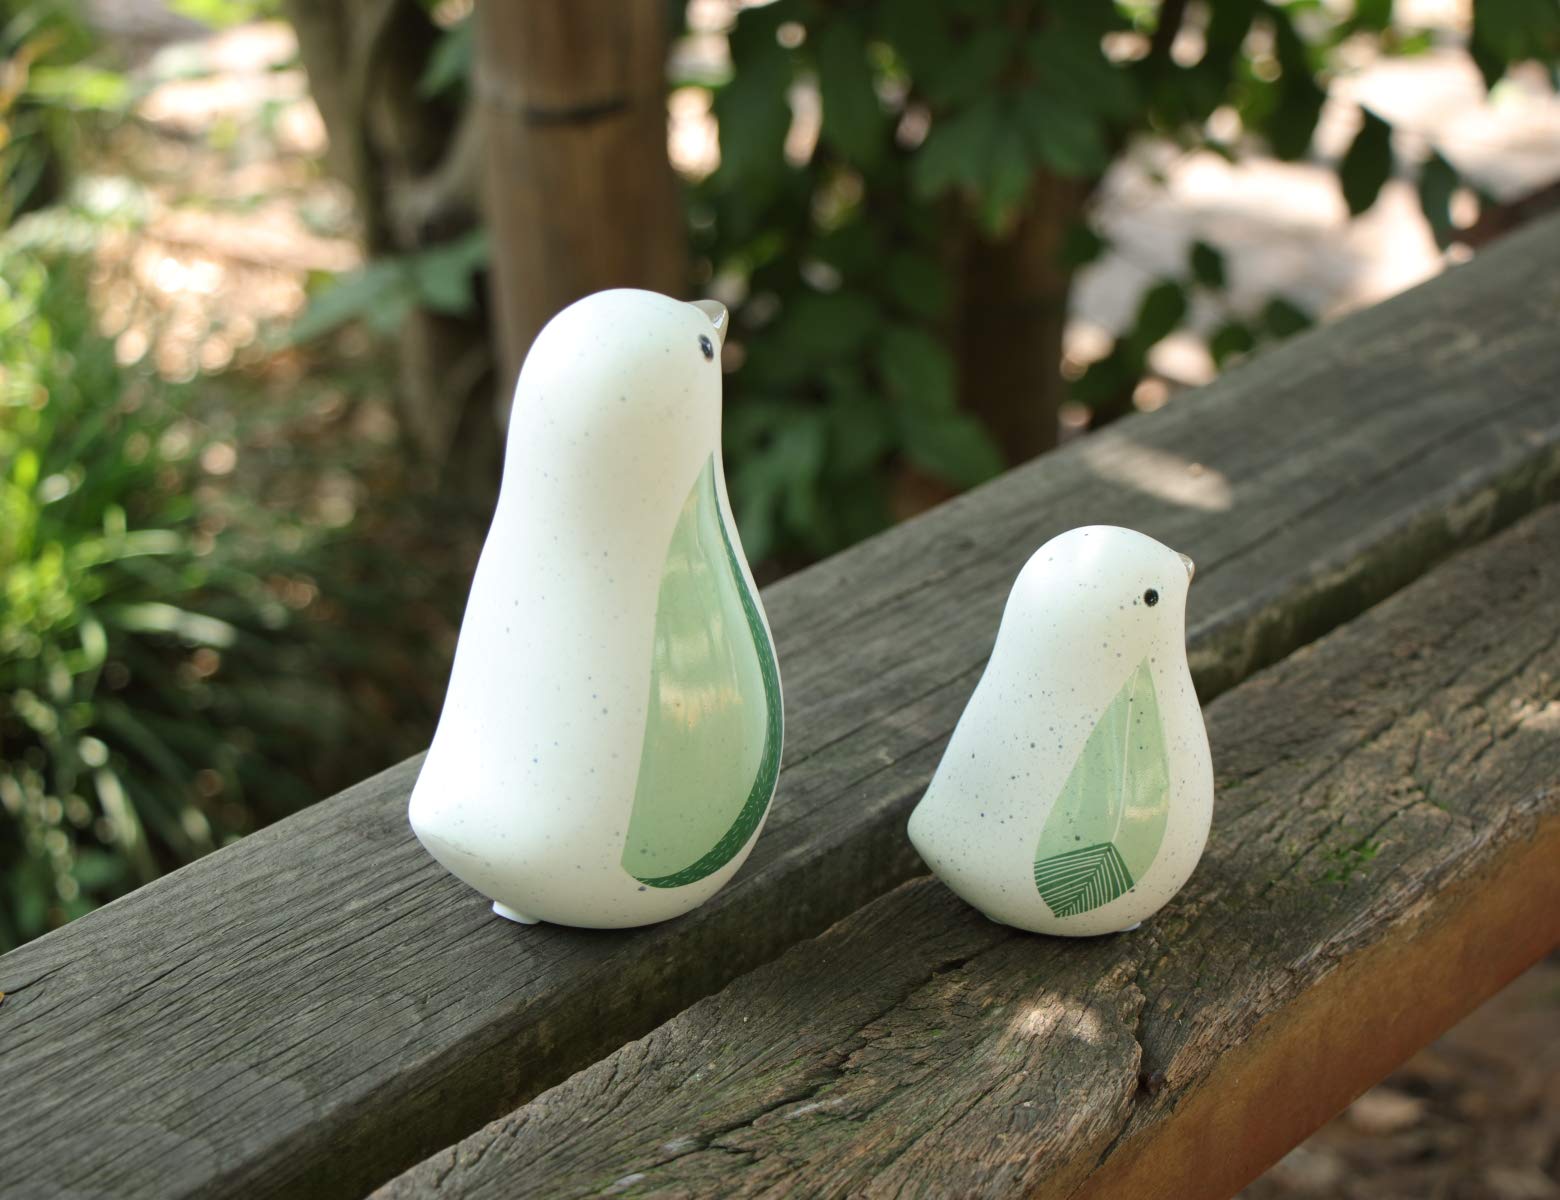 Unique Sitting Birds Figurines with Green Leaf Wings , Animal Statues, Home Garden Décor Tabletop Ornament A (Set of 2)